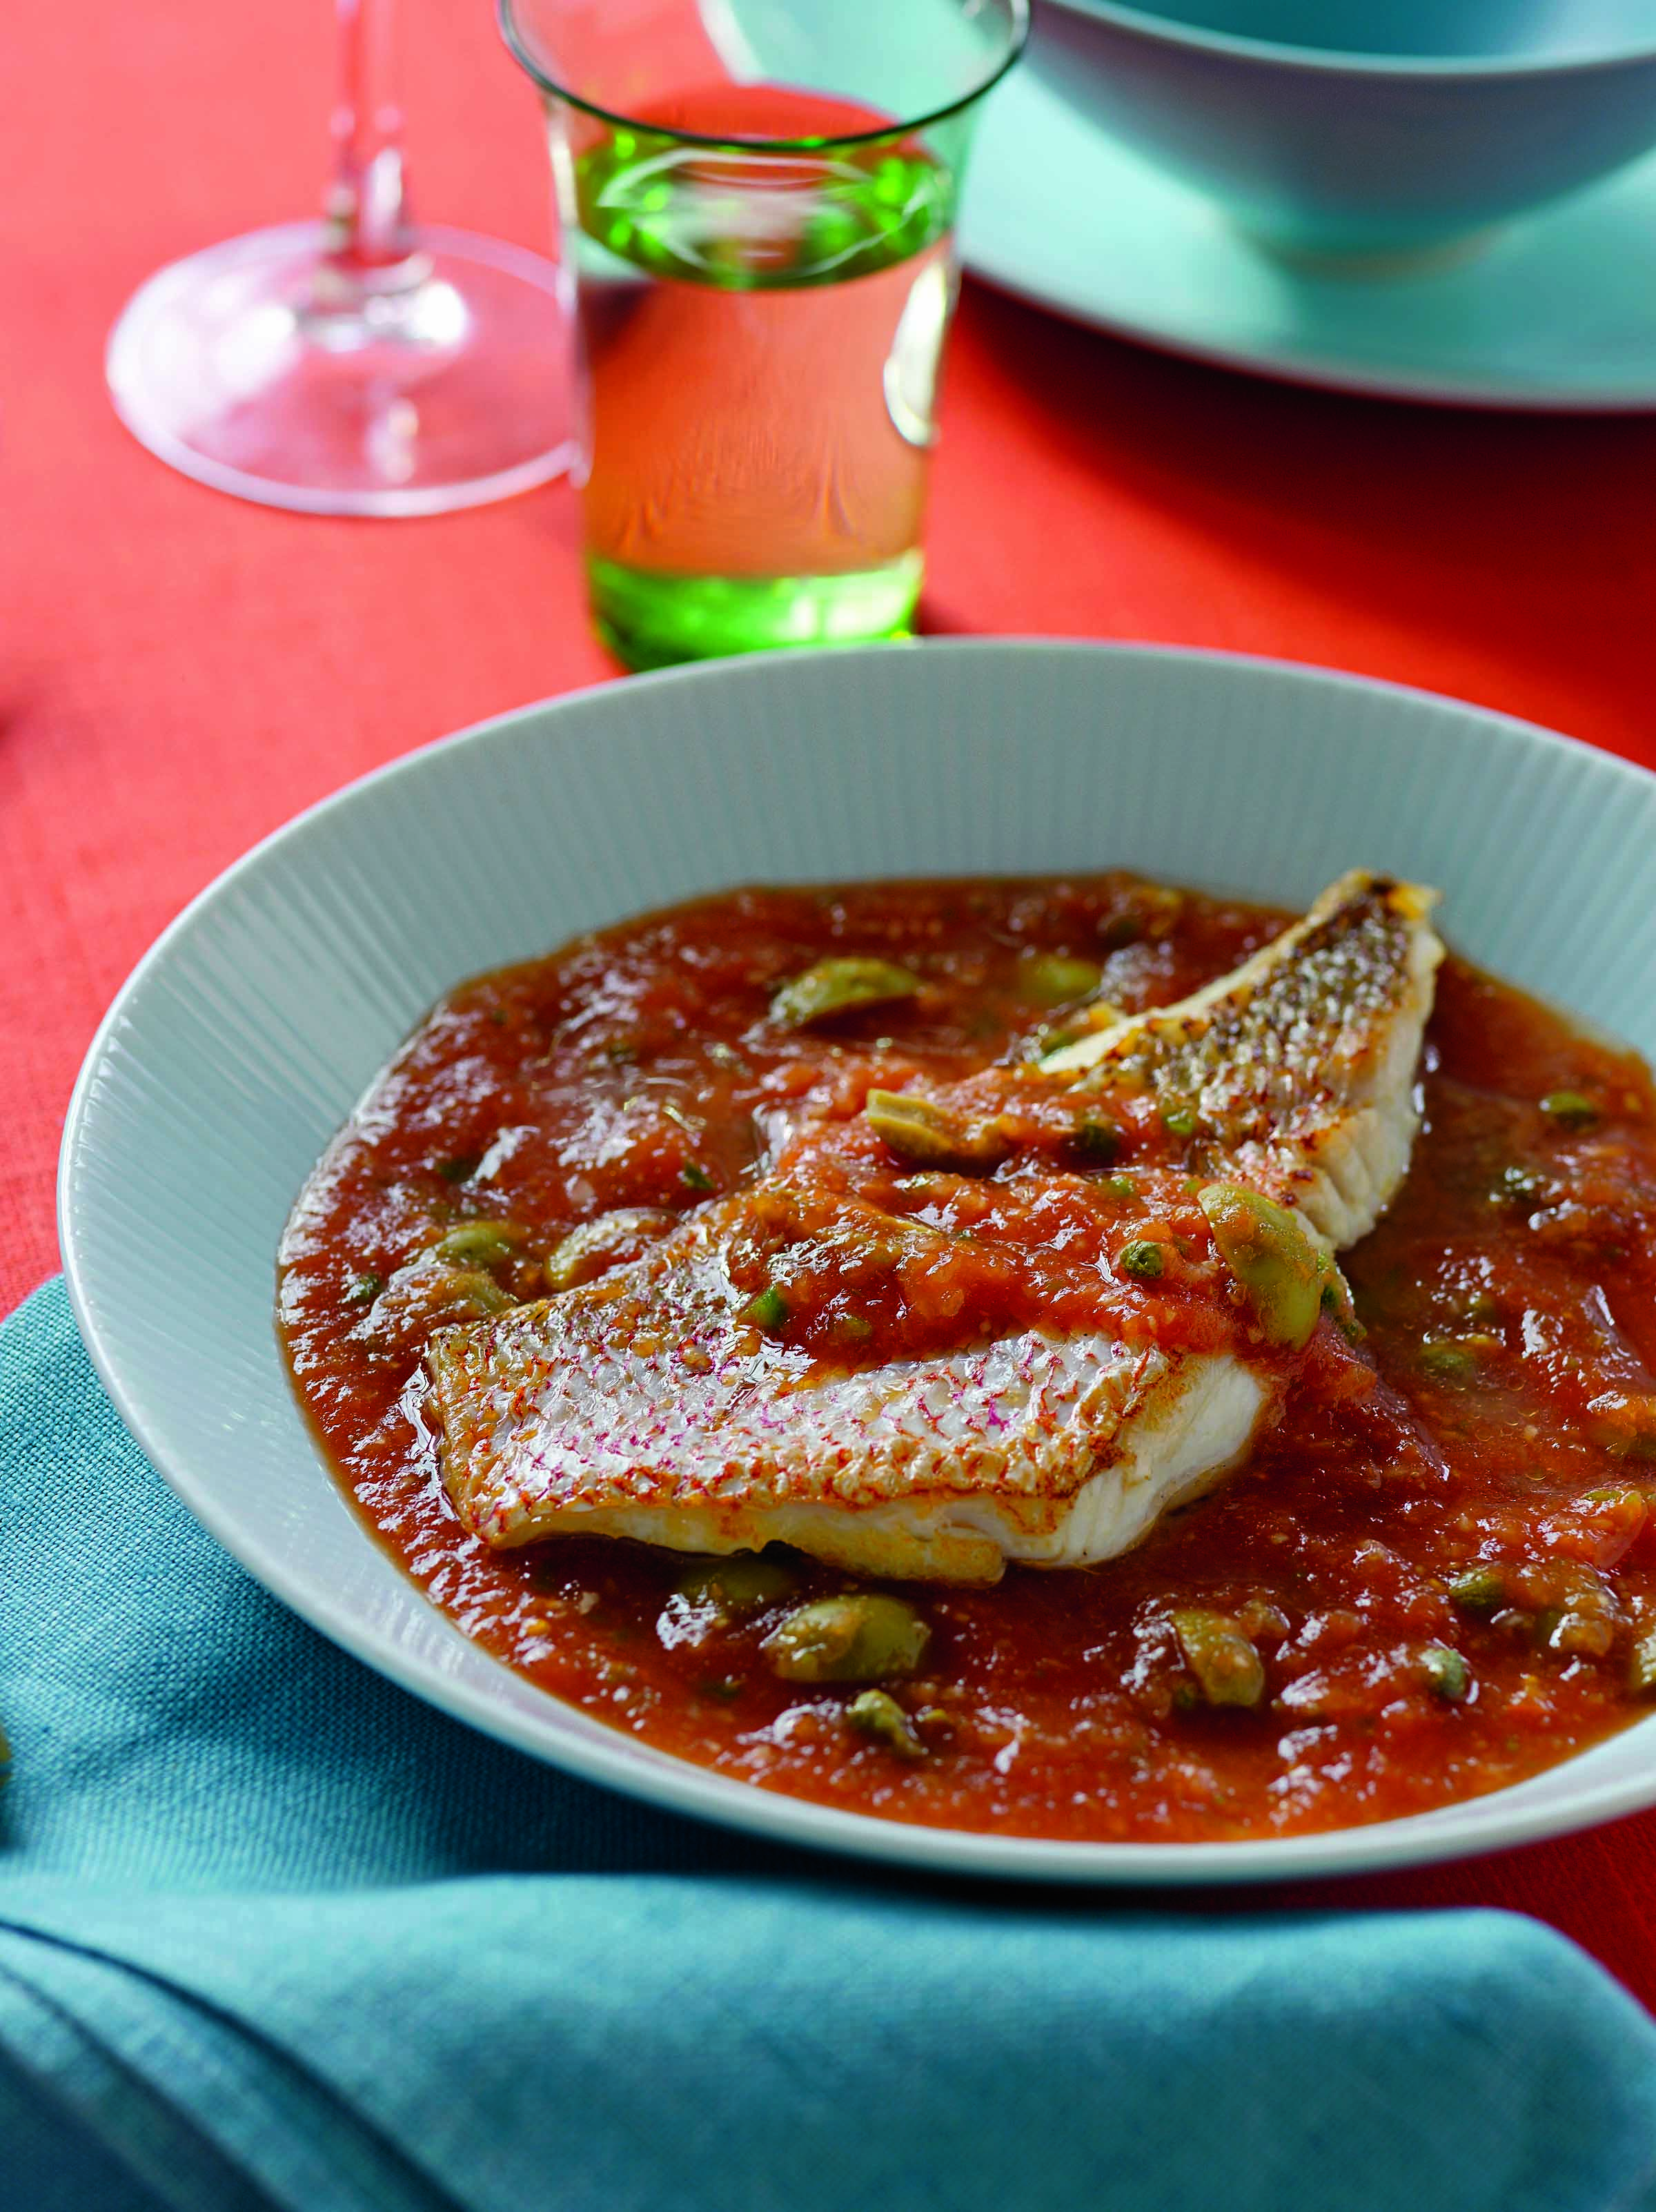 Healthy Red Snapper Recipe